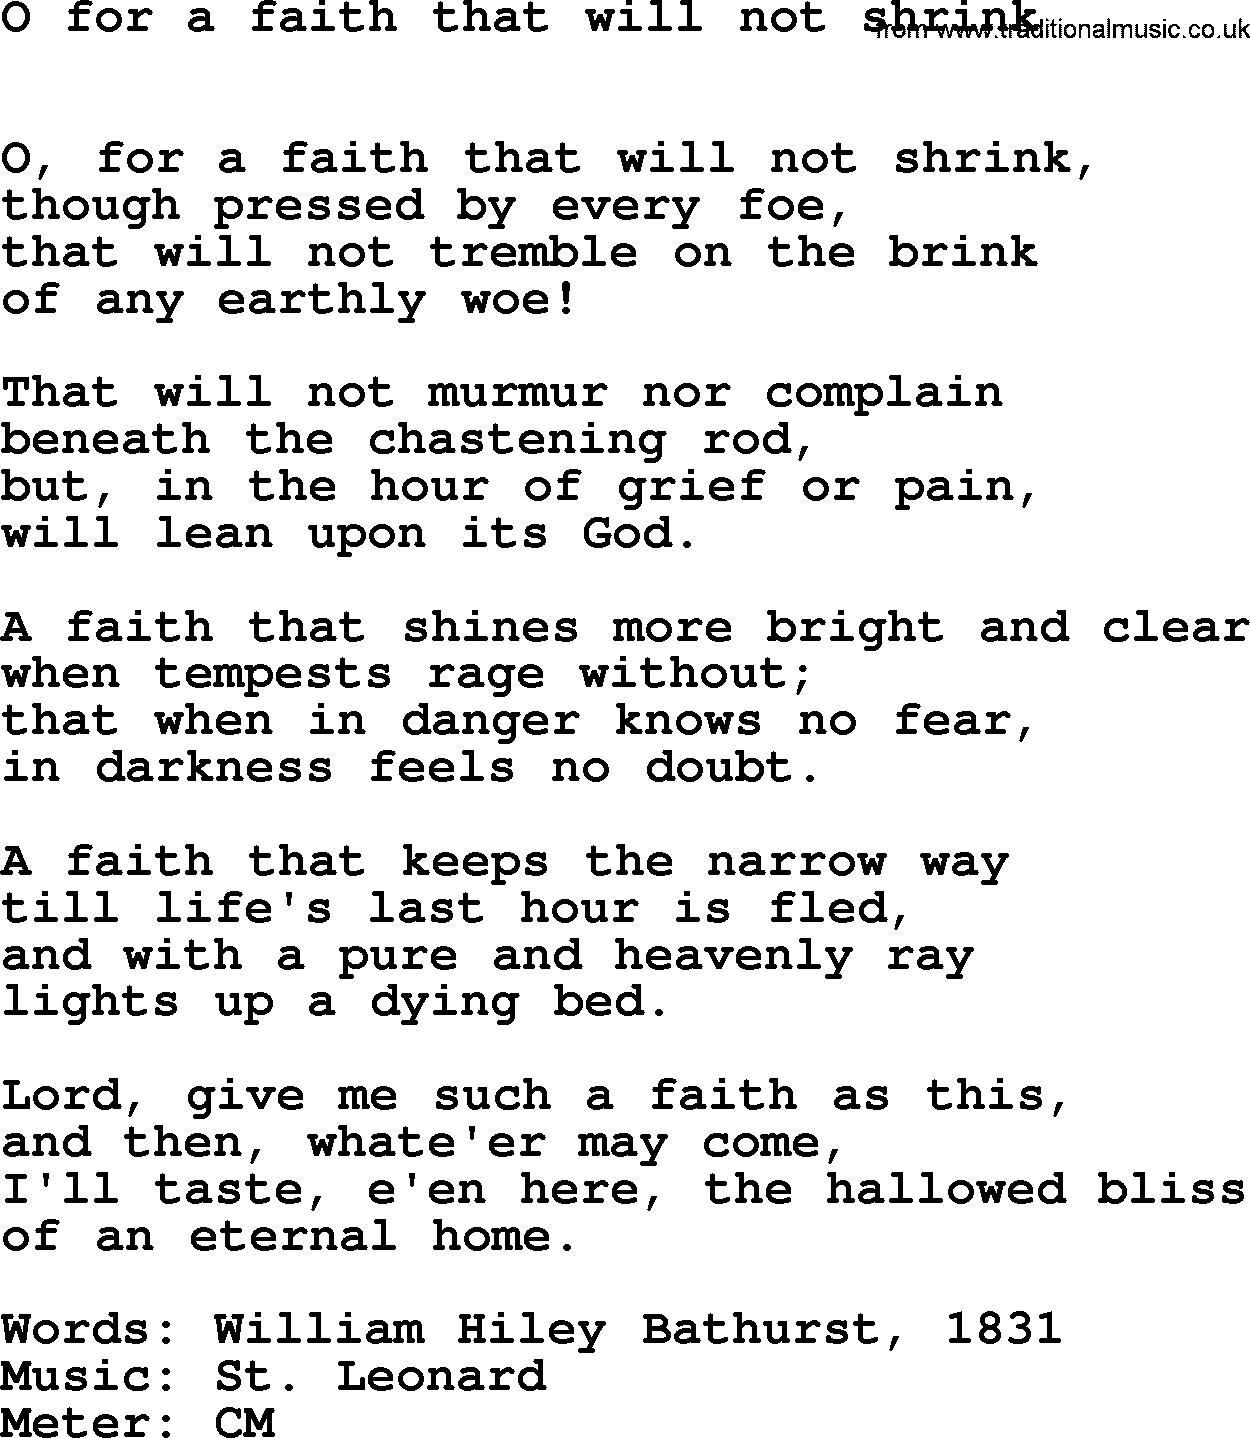 Book of Common Praise Hymn: O For A Faith That Will Not Shrink.txt lyrics with midi music